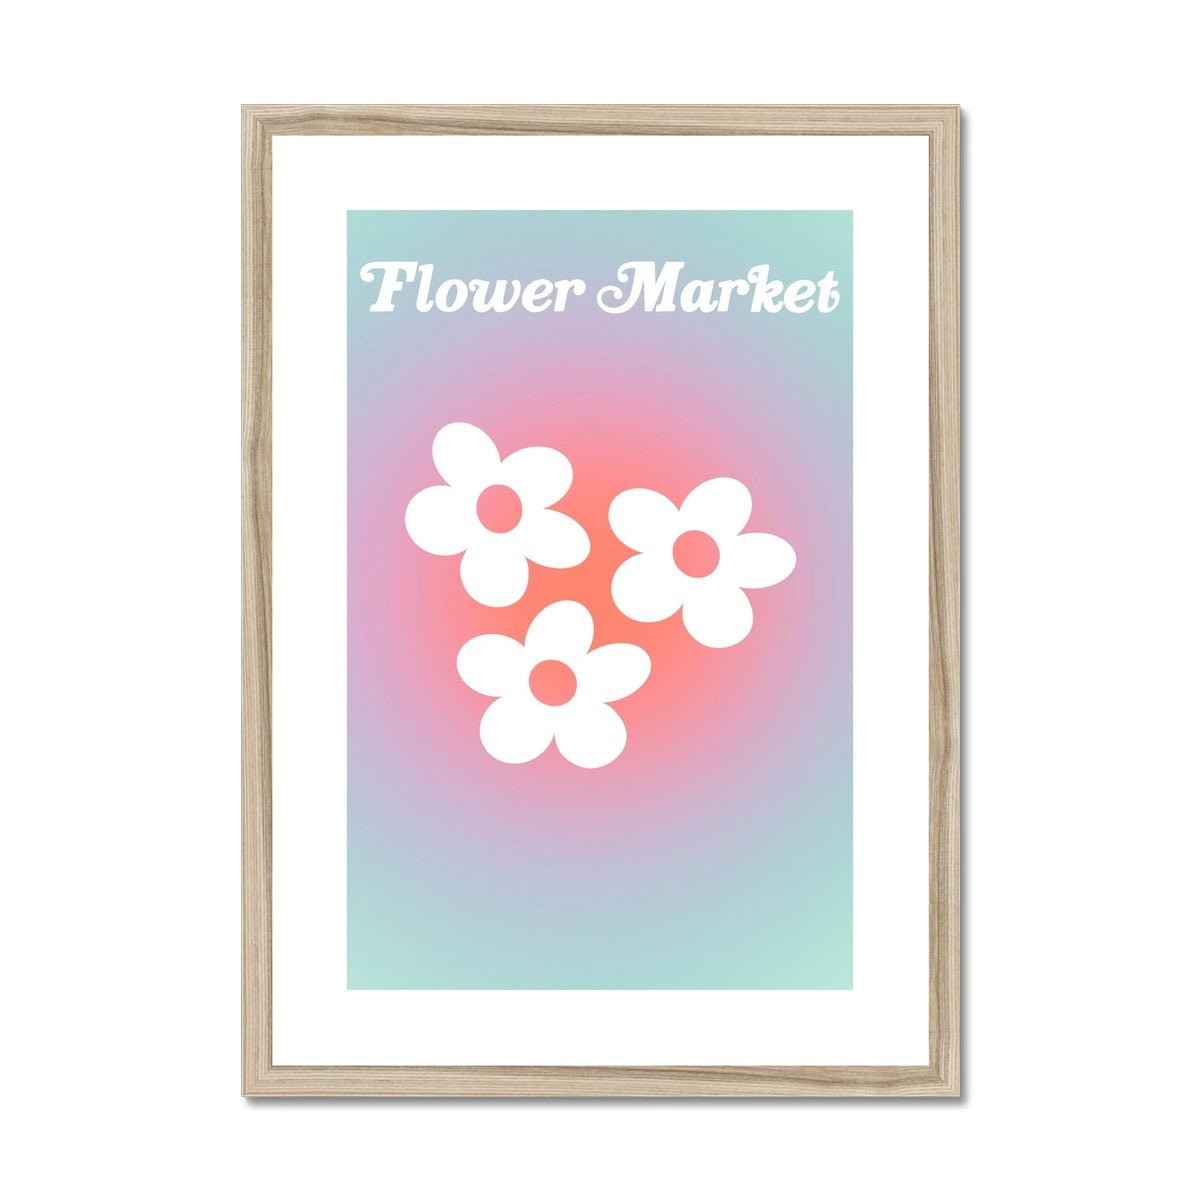 The Flower Market / Sunset collection features wall art with sunset colored aura gradients and daisy illustrations under original hand drawn typography. Sorbet colored flower market prints that make beautiful danish pastel style posters.